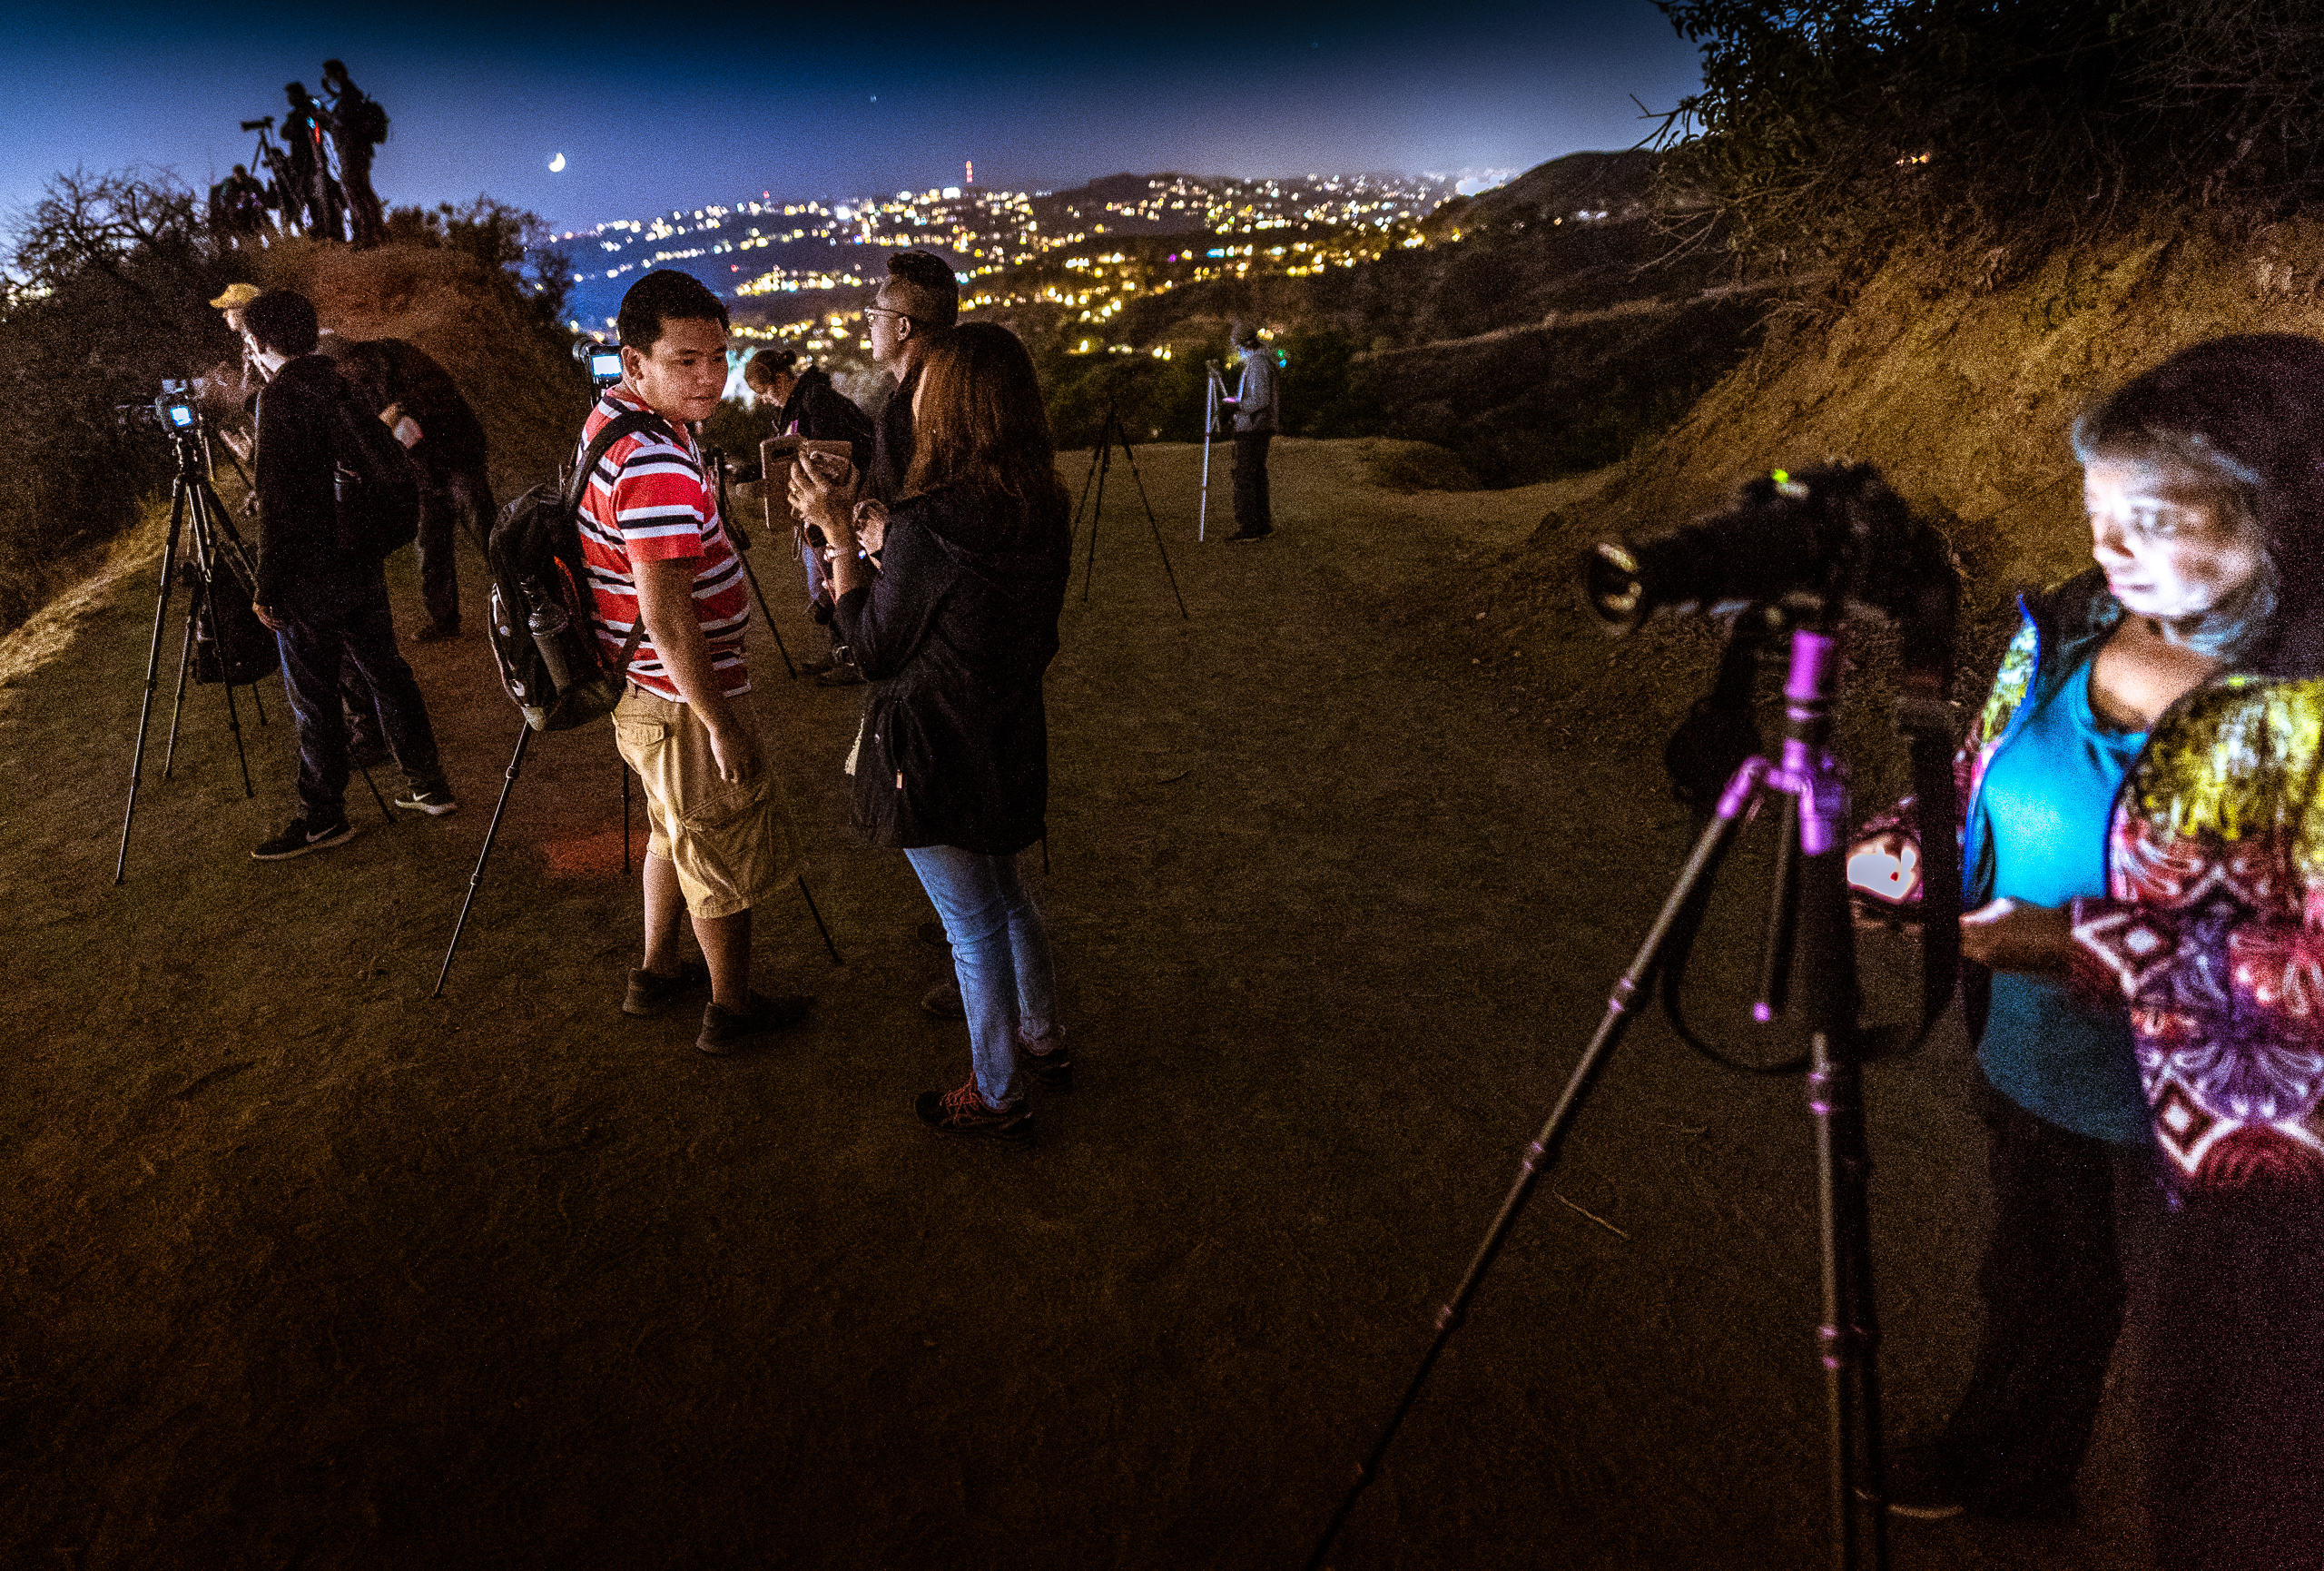 The Light Chasers Meetup group visiting Griffith Observatory and taking a 20 minute hike up the hill to photograph the Observatory against the lights of Los Angeles